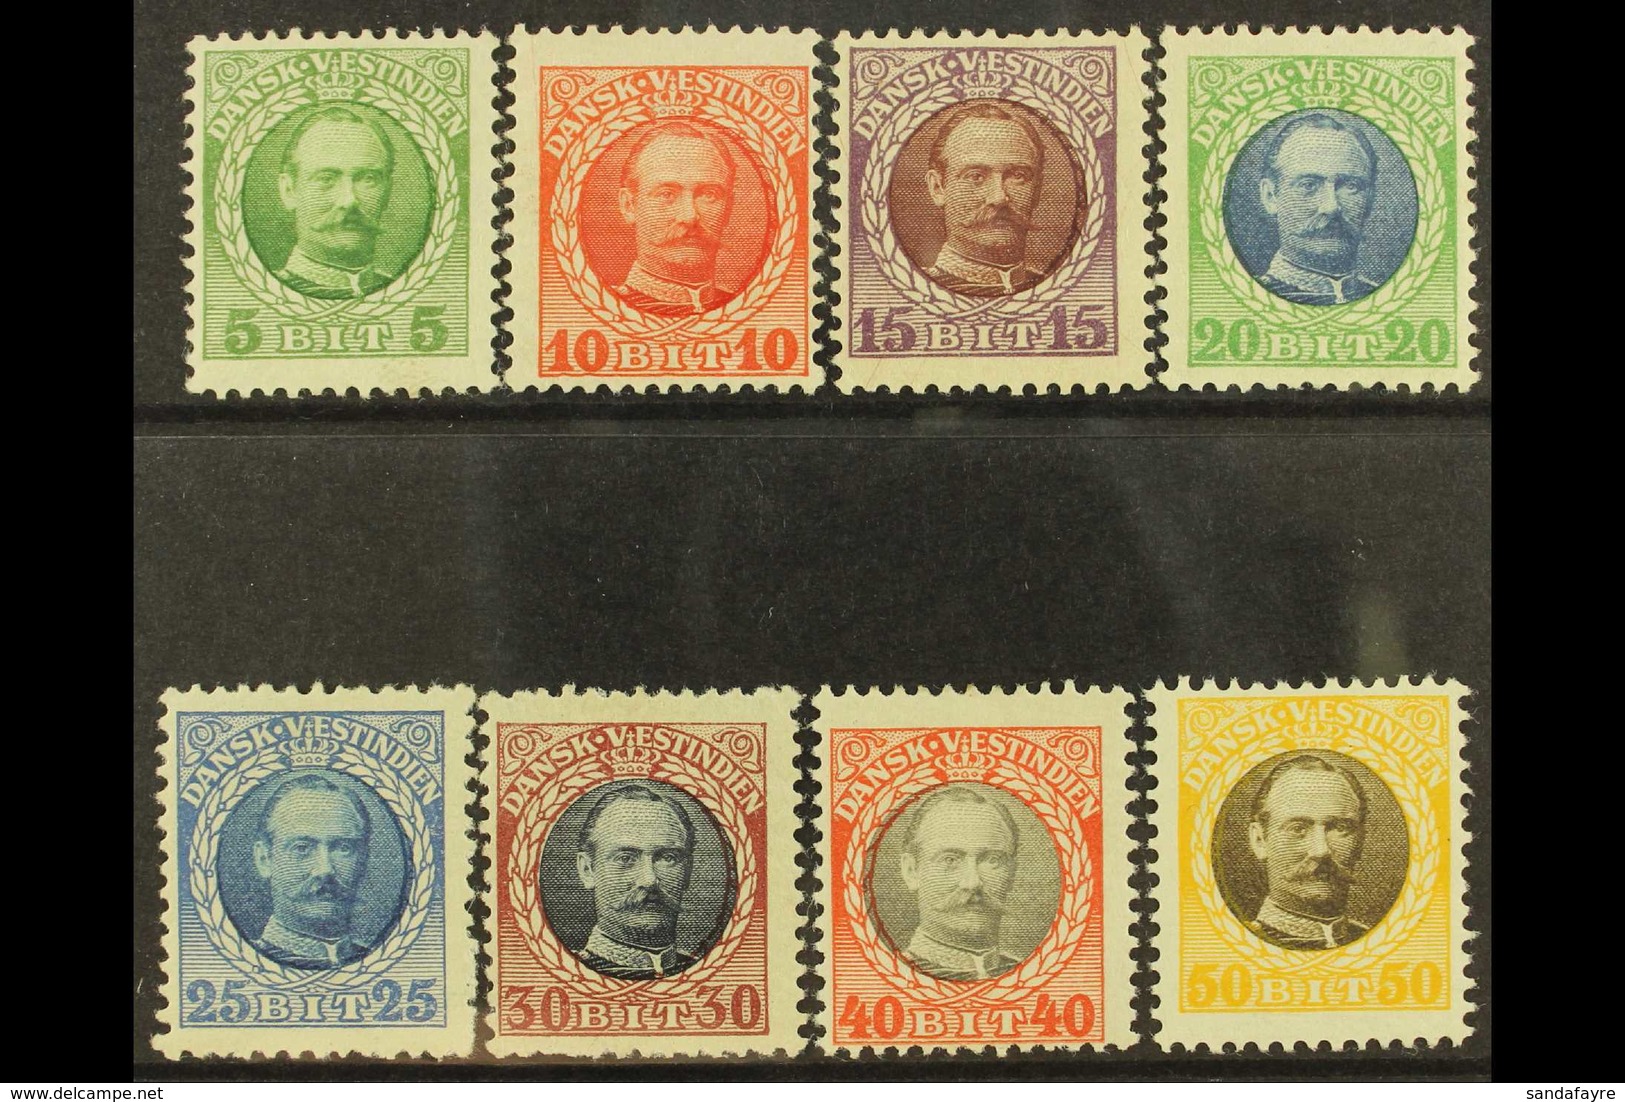 1907-08  Frederik VIII Set, Facit 41/48, All But The 15b And 40b. Are Fine Never Hinged Mint. (8) For More Images, Pleas - Danish West Indies